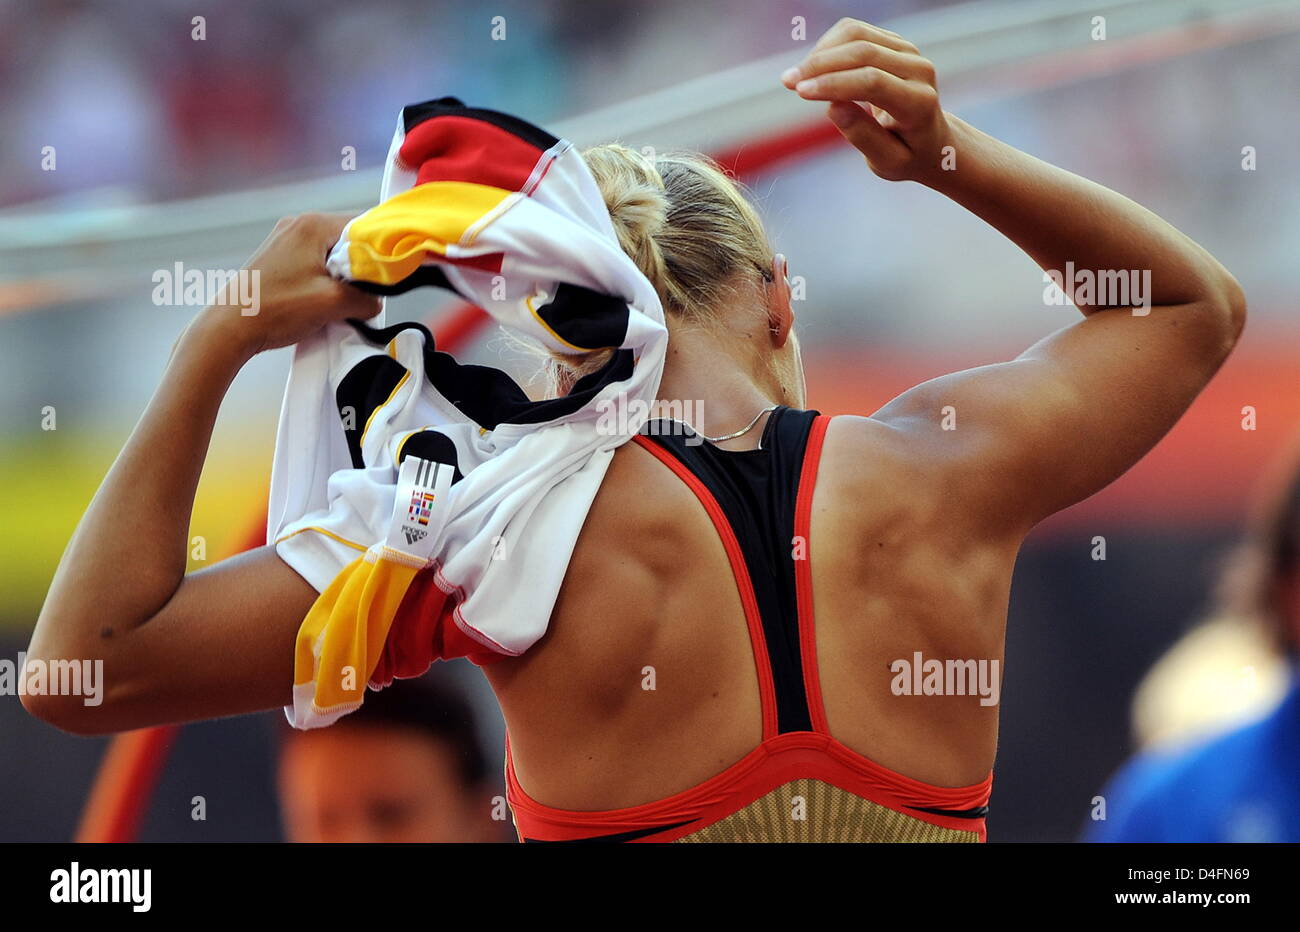 German Jennifer Oeser takes off her shirt in the women's heptathlon high jump of the Athletics events in the National Stadium at the Beijing 2008 Olympic Games, Beijing, China, 15 August 2008. Photo: Karl-Josef Hildenbrand dpa ###dpa### Stock Photo